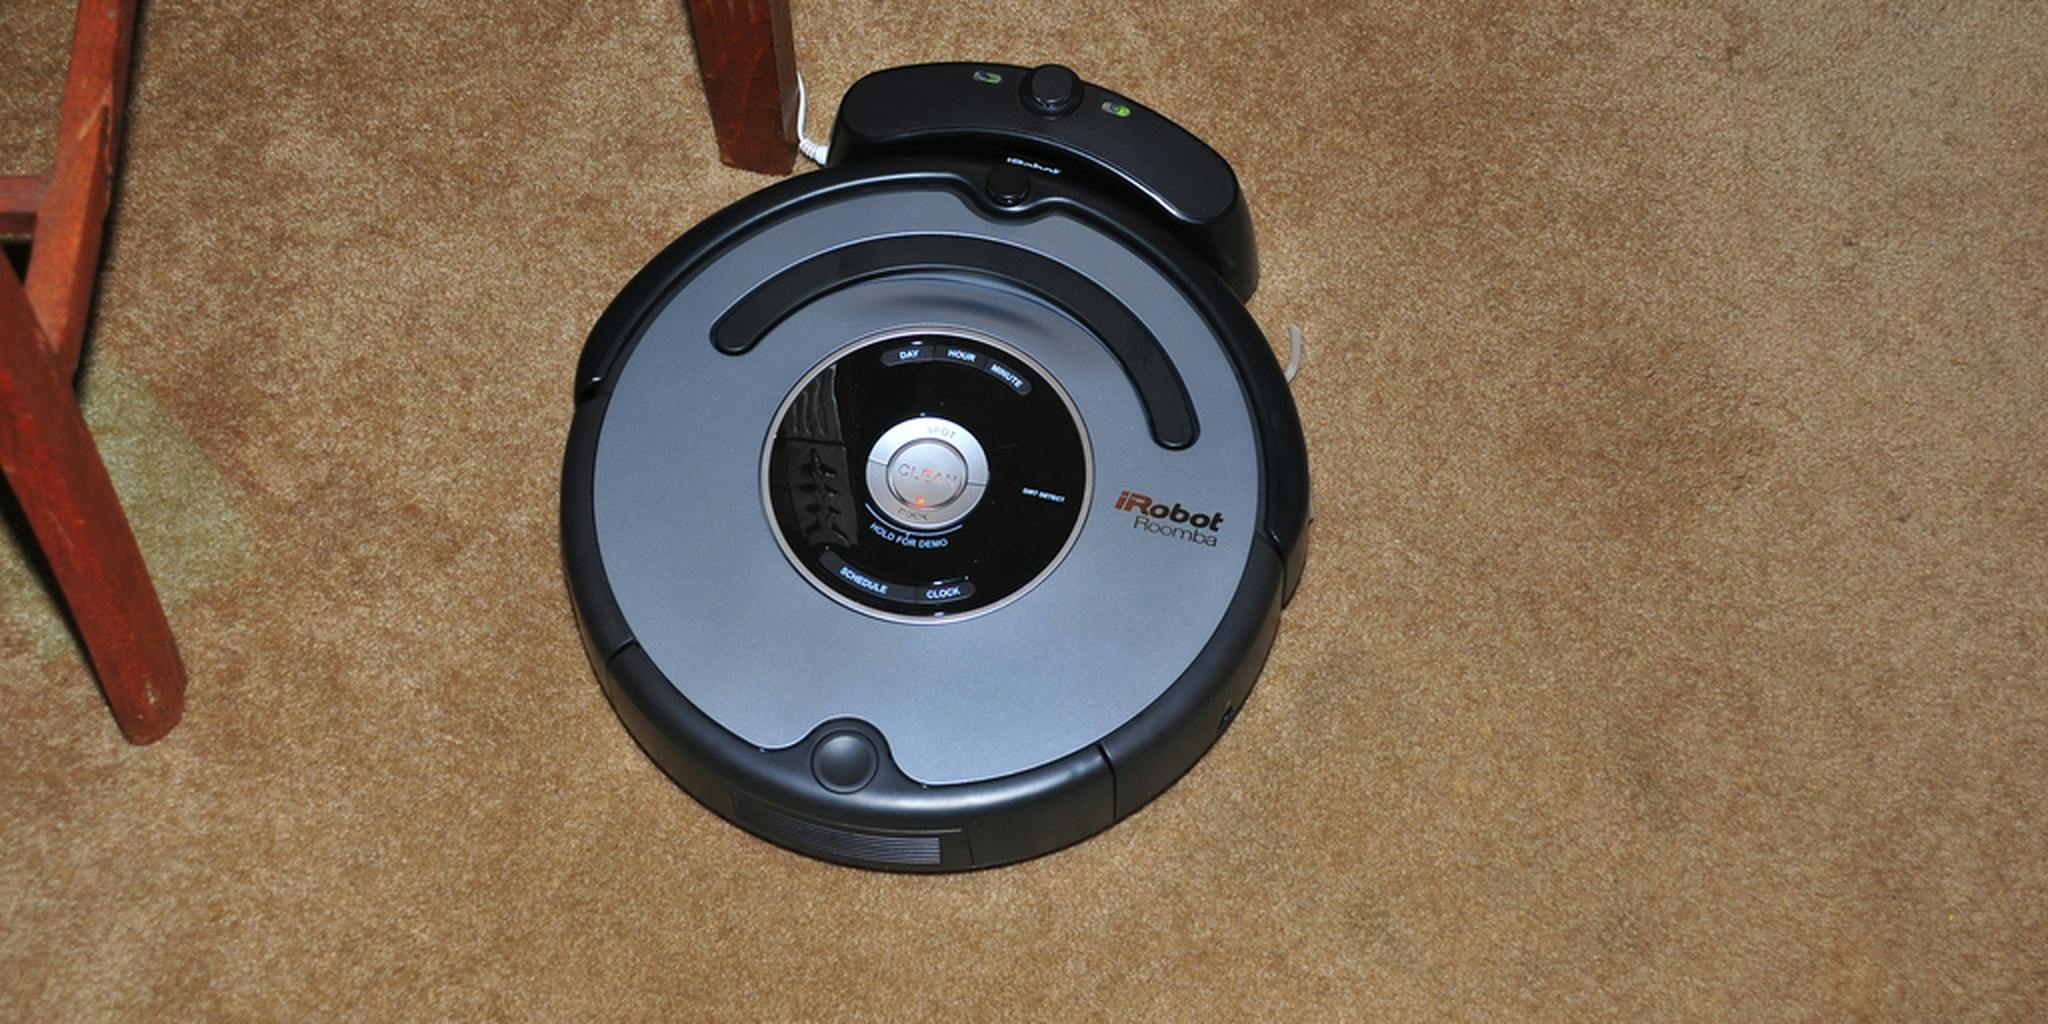 Fuerza motriz masa Berri Roomba tries to clean up dog poop, does a crappy job - The Daily Dot